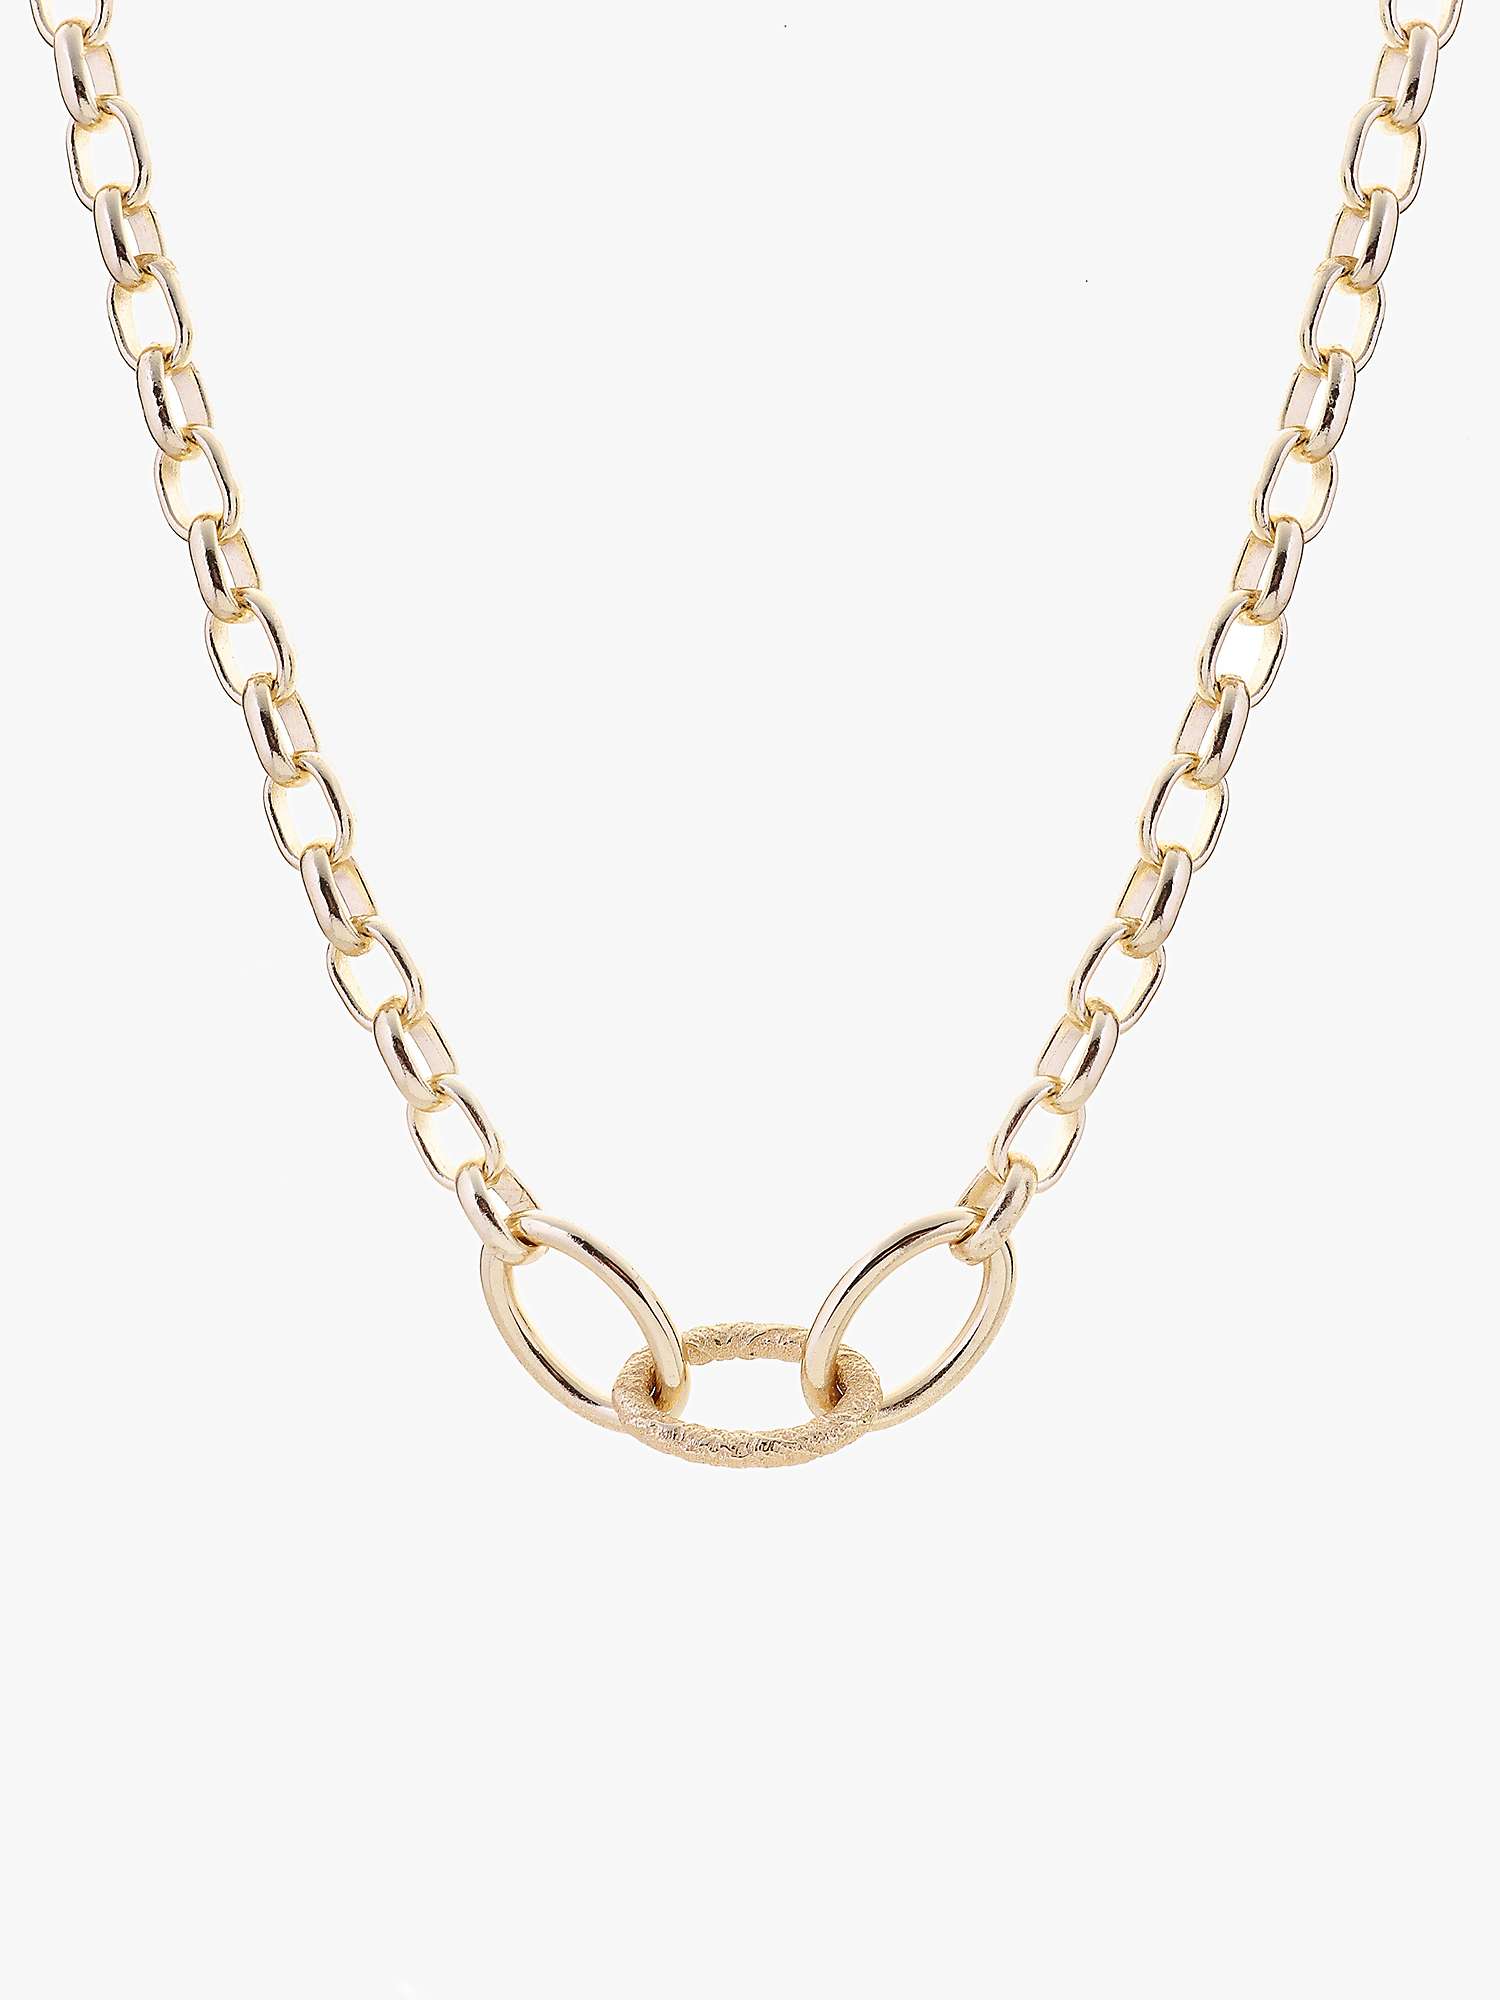 Buy Tutti & Co Behold Textured Oval Link Necklace, Gold Online at johnlewis.com